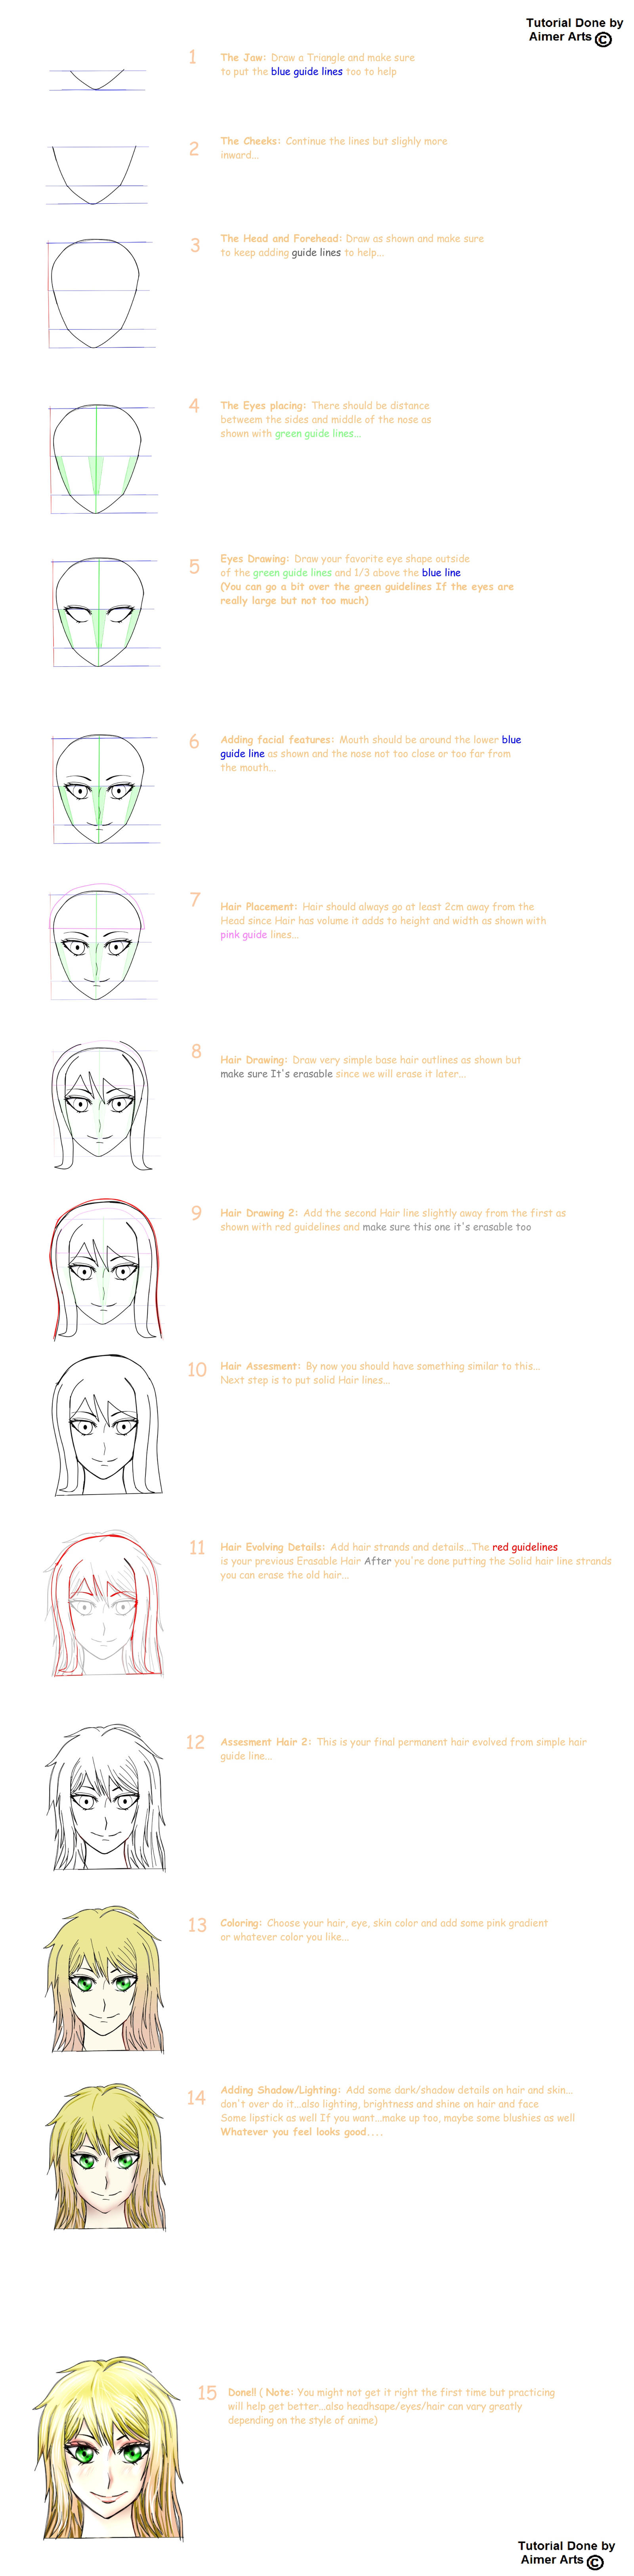 Tutorial Anime Front view Drawing Easy Guide by AimerArts on DeviantArt